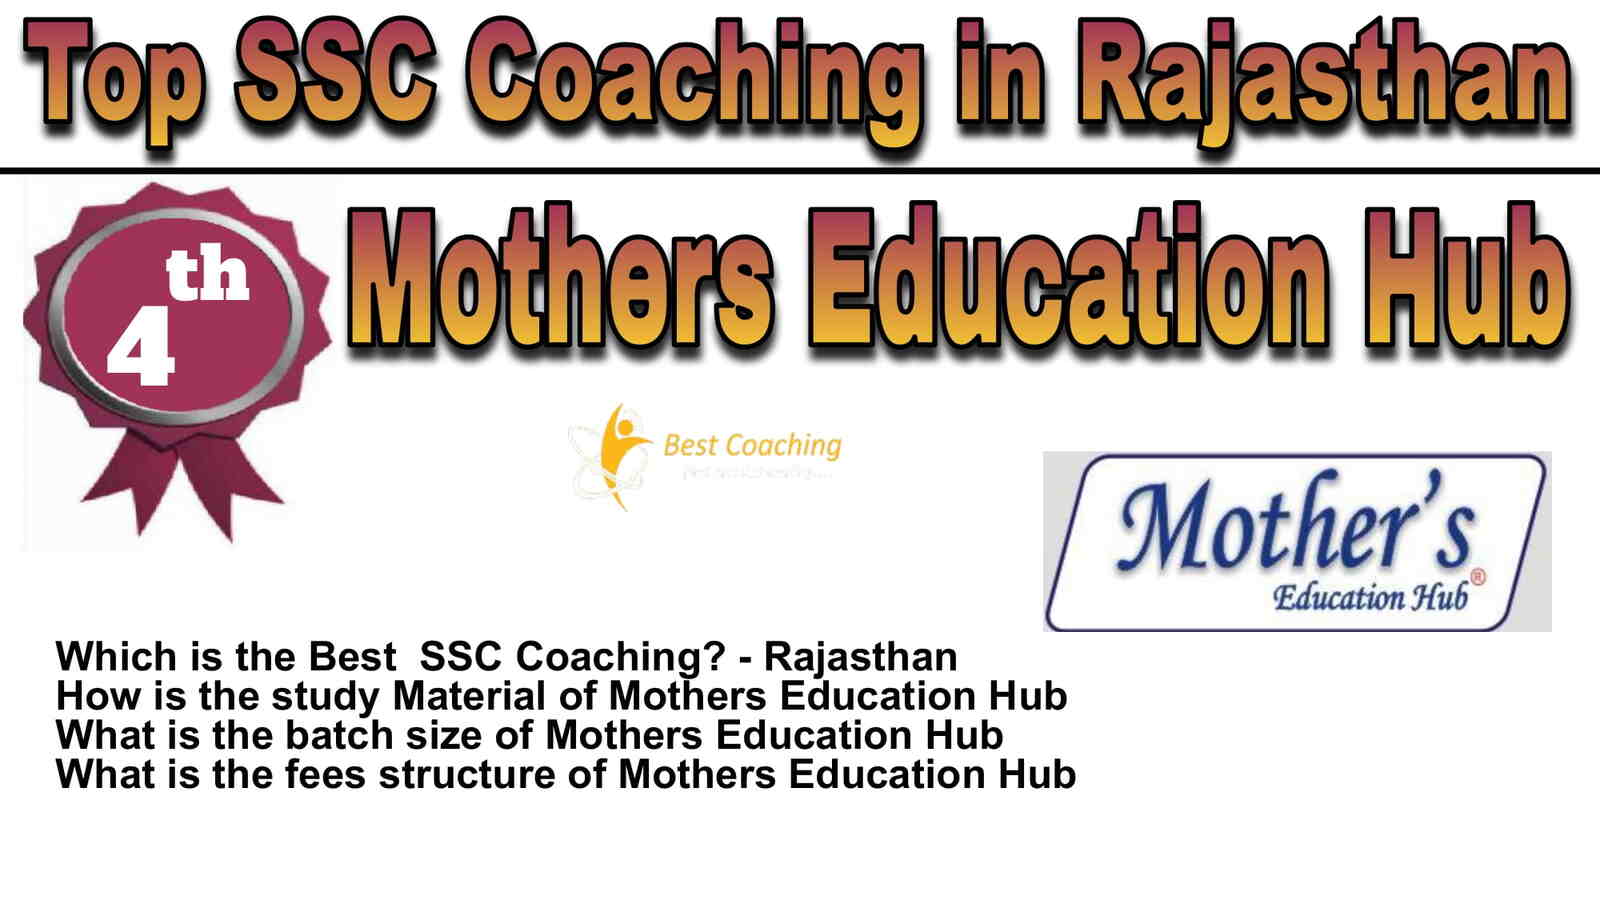 Rank 4 Best SSC Coaching in Rajasthan